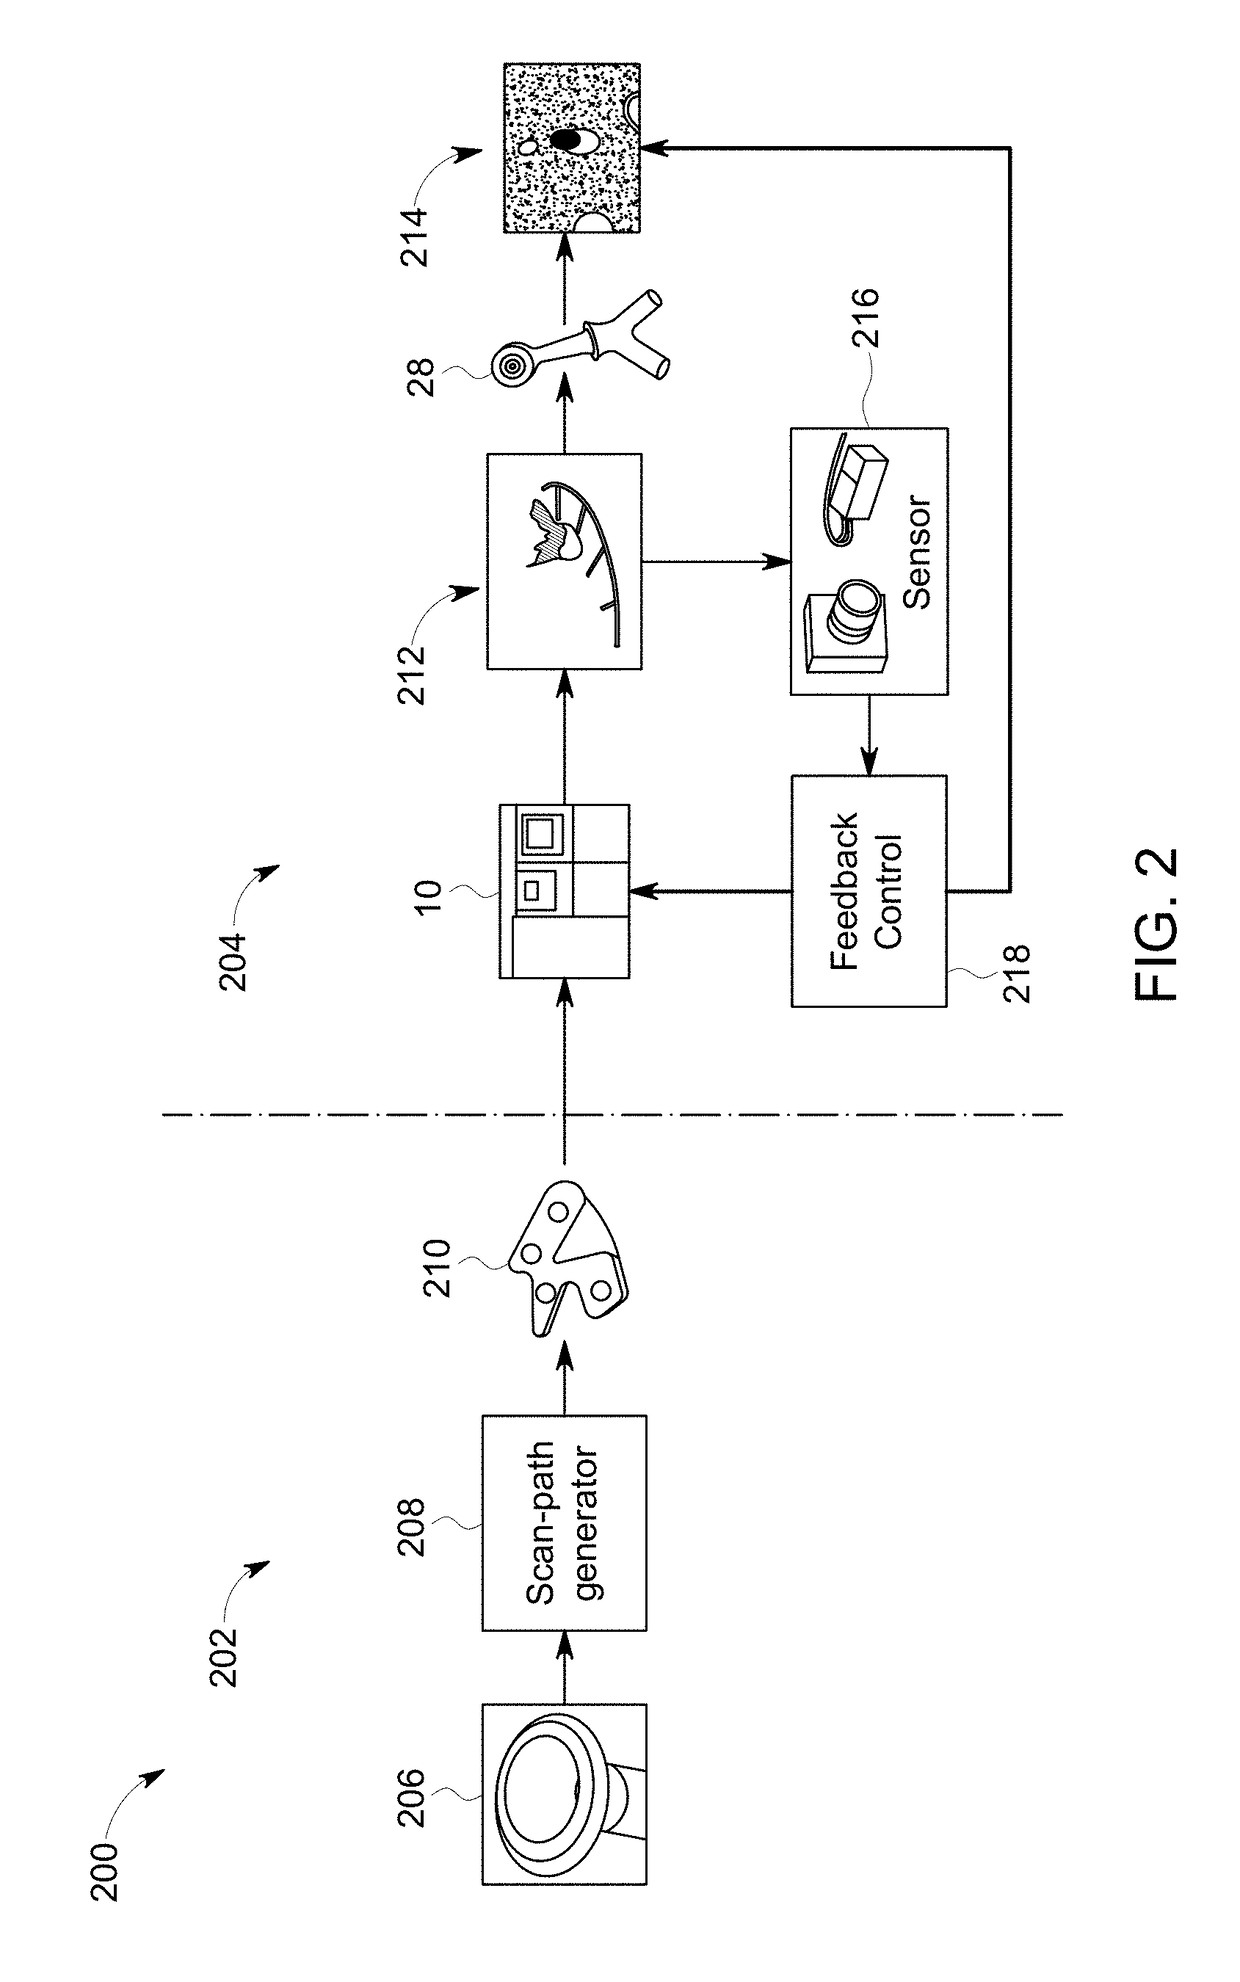 Systems and method for advanced additive manufacturing